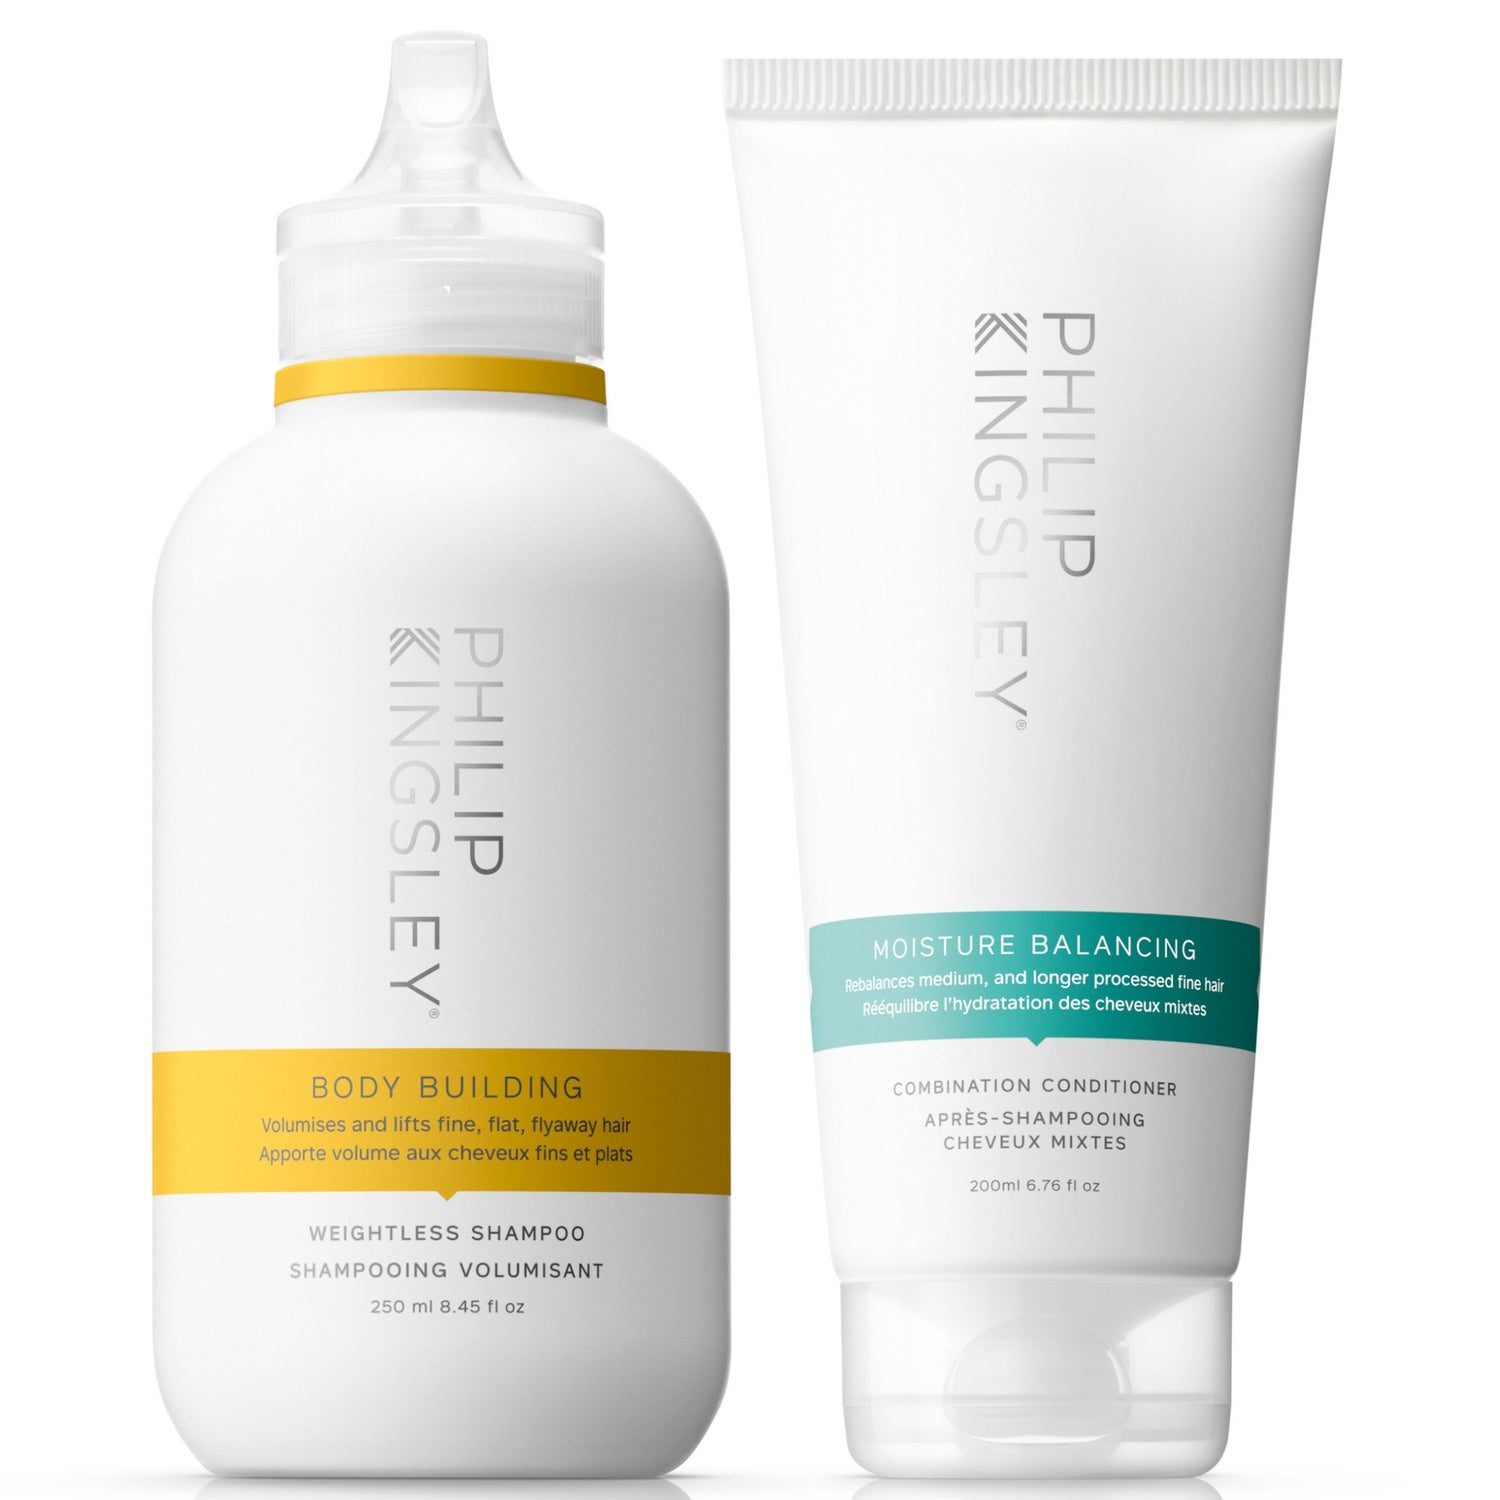 Philip Kingsley Body Building Shampoo 250ml and Moisture Balancing Conditioner 200ml Duo